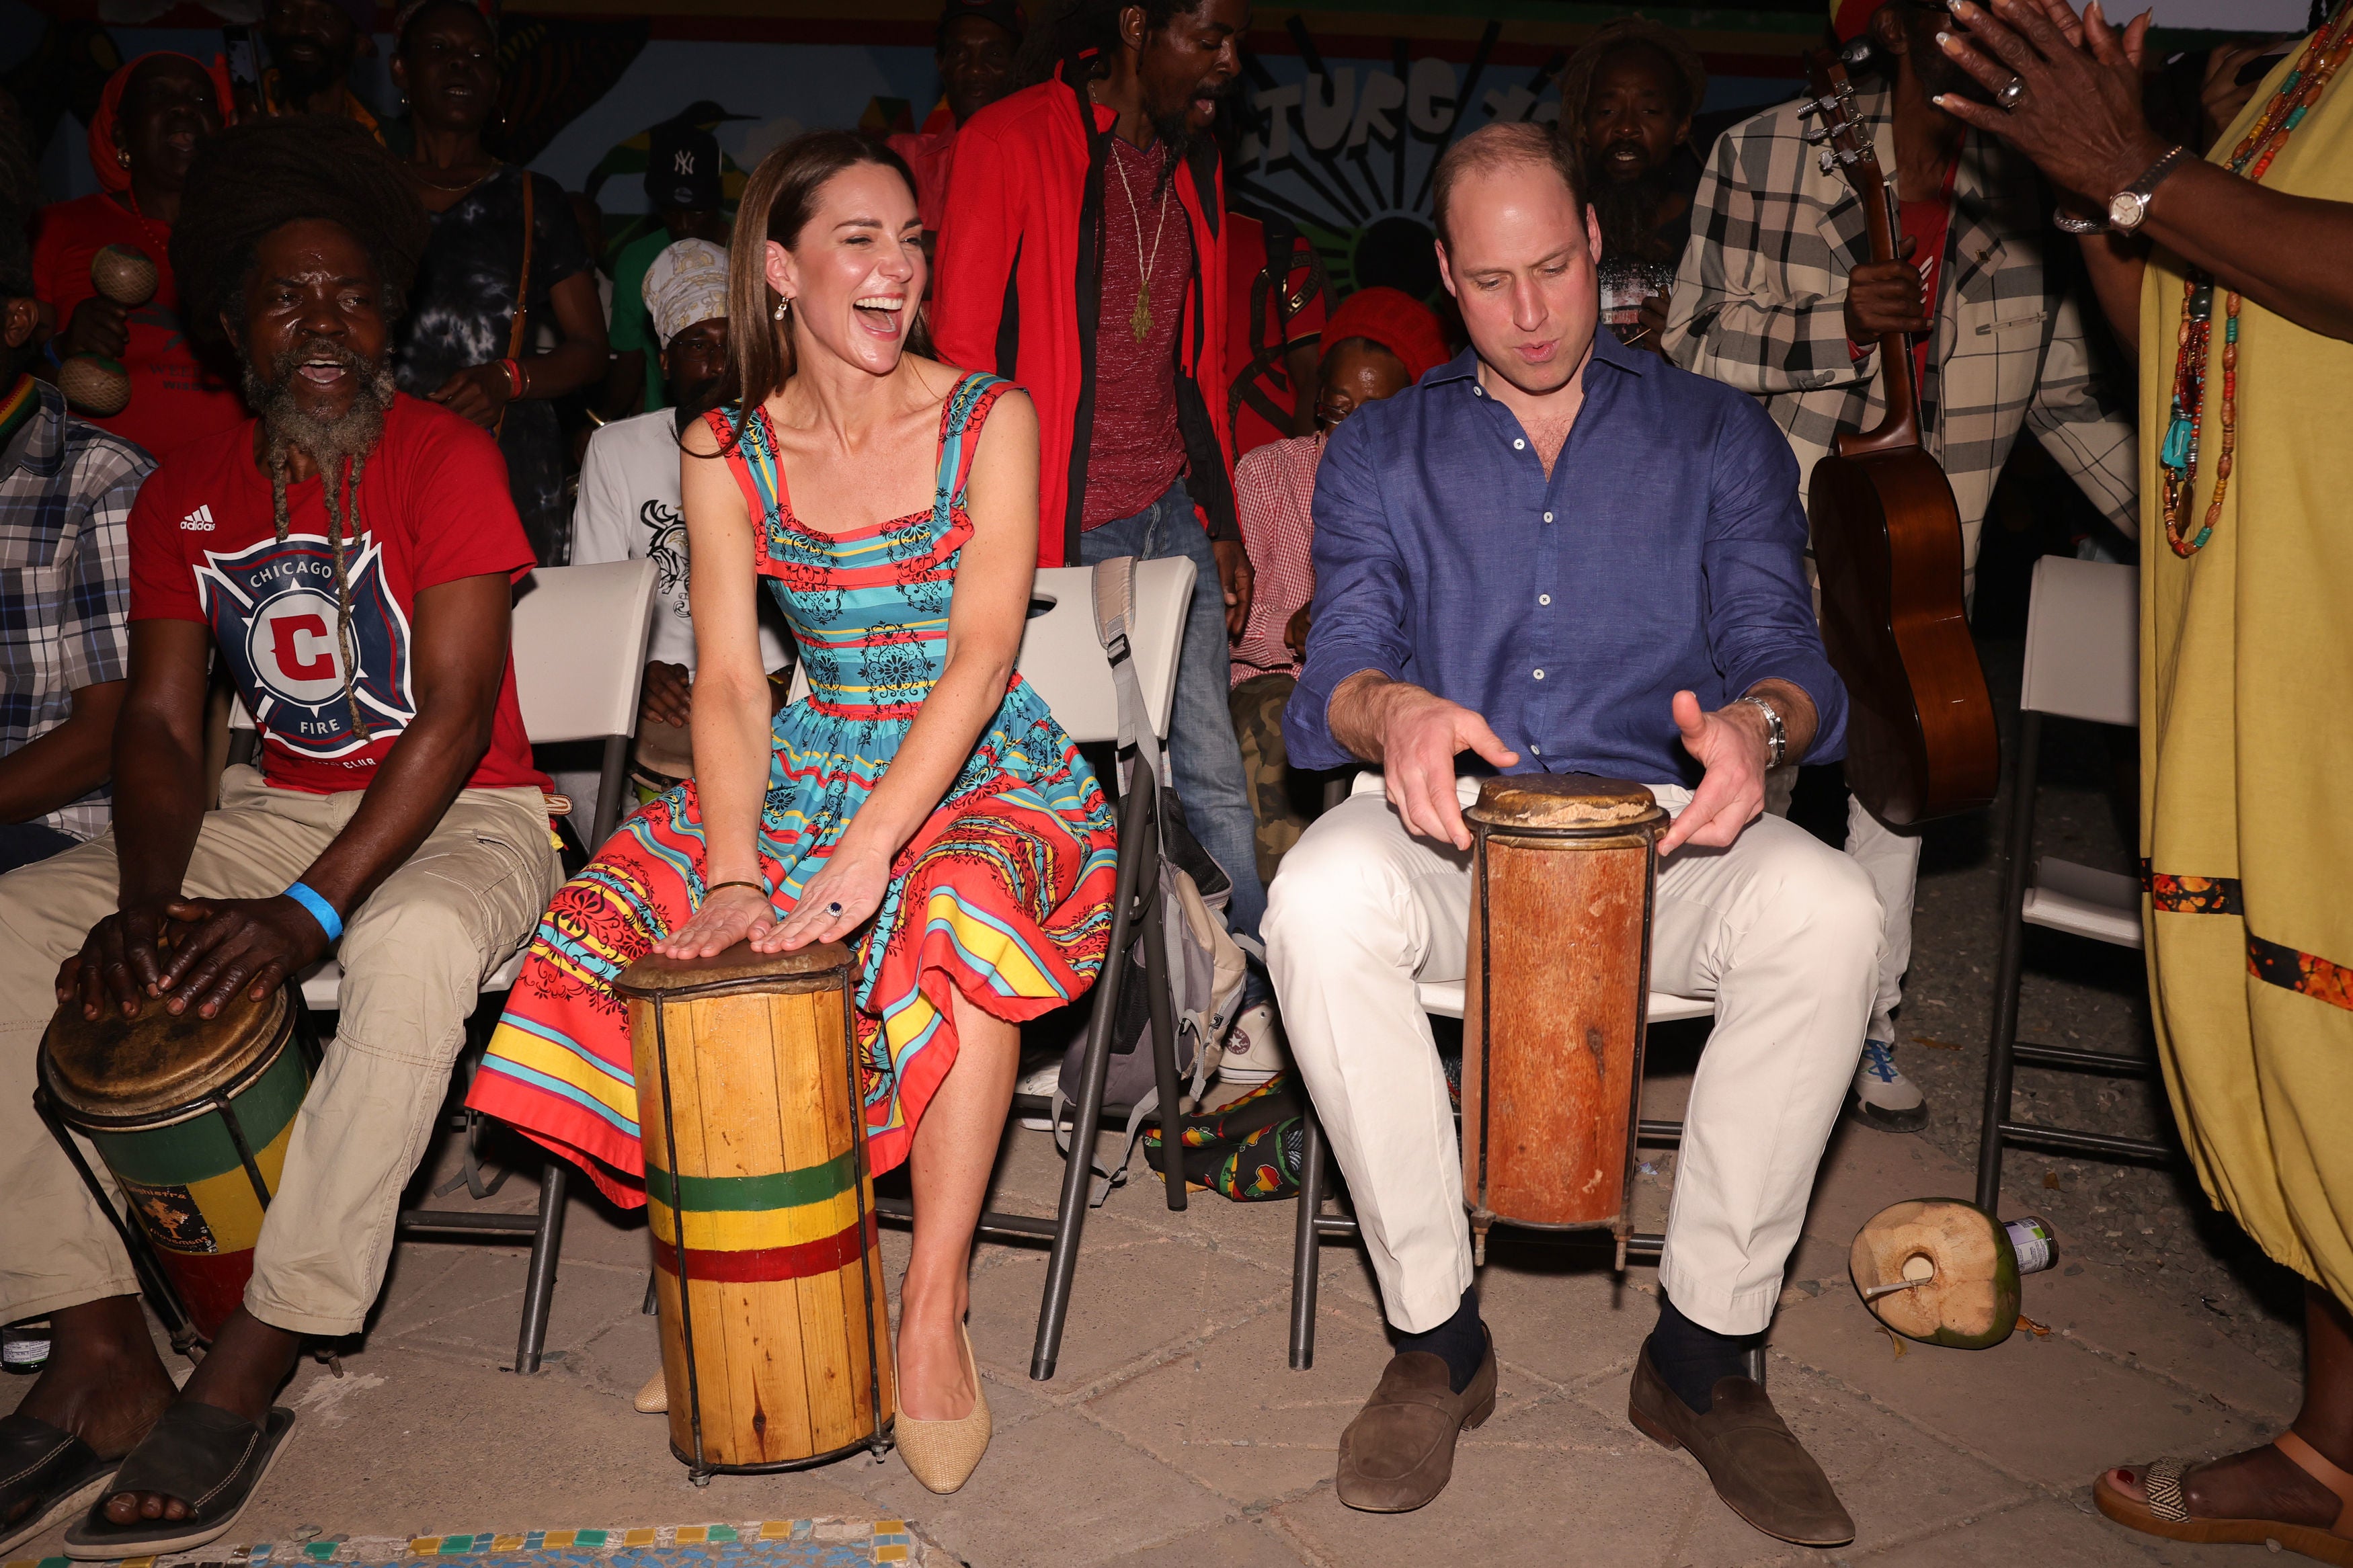 The couple play music during a visit to the former home of musician Bob Marley in Kingston